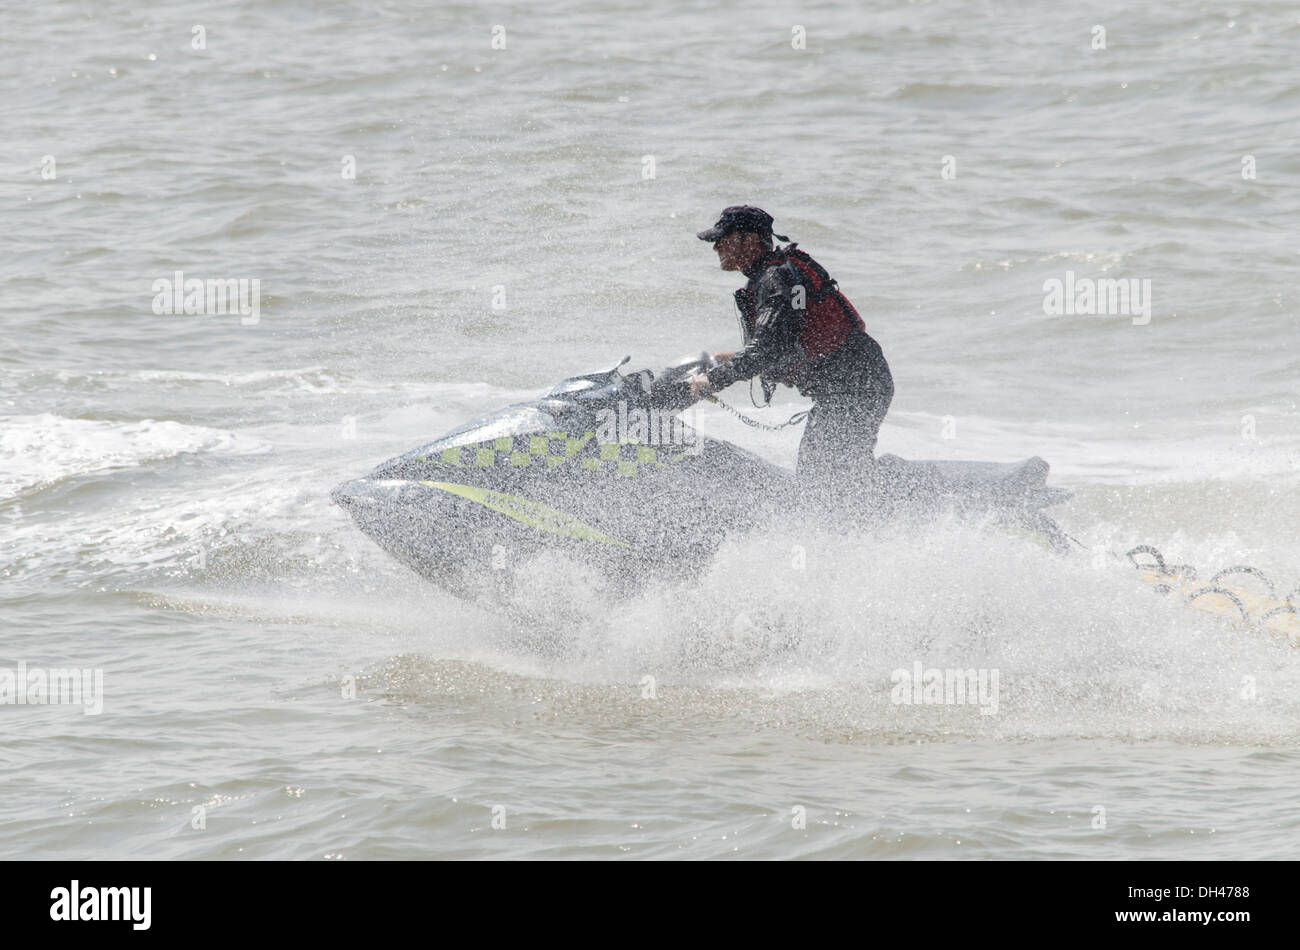 police marine unit out at sea England Stock Photo